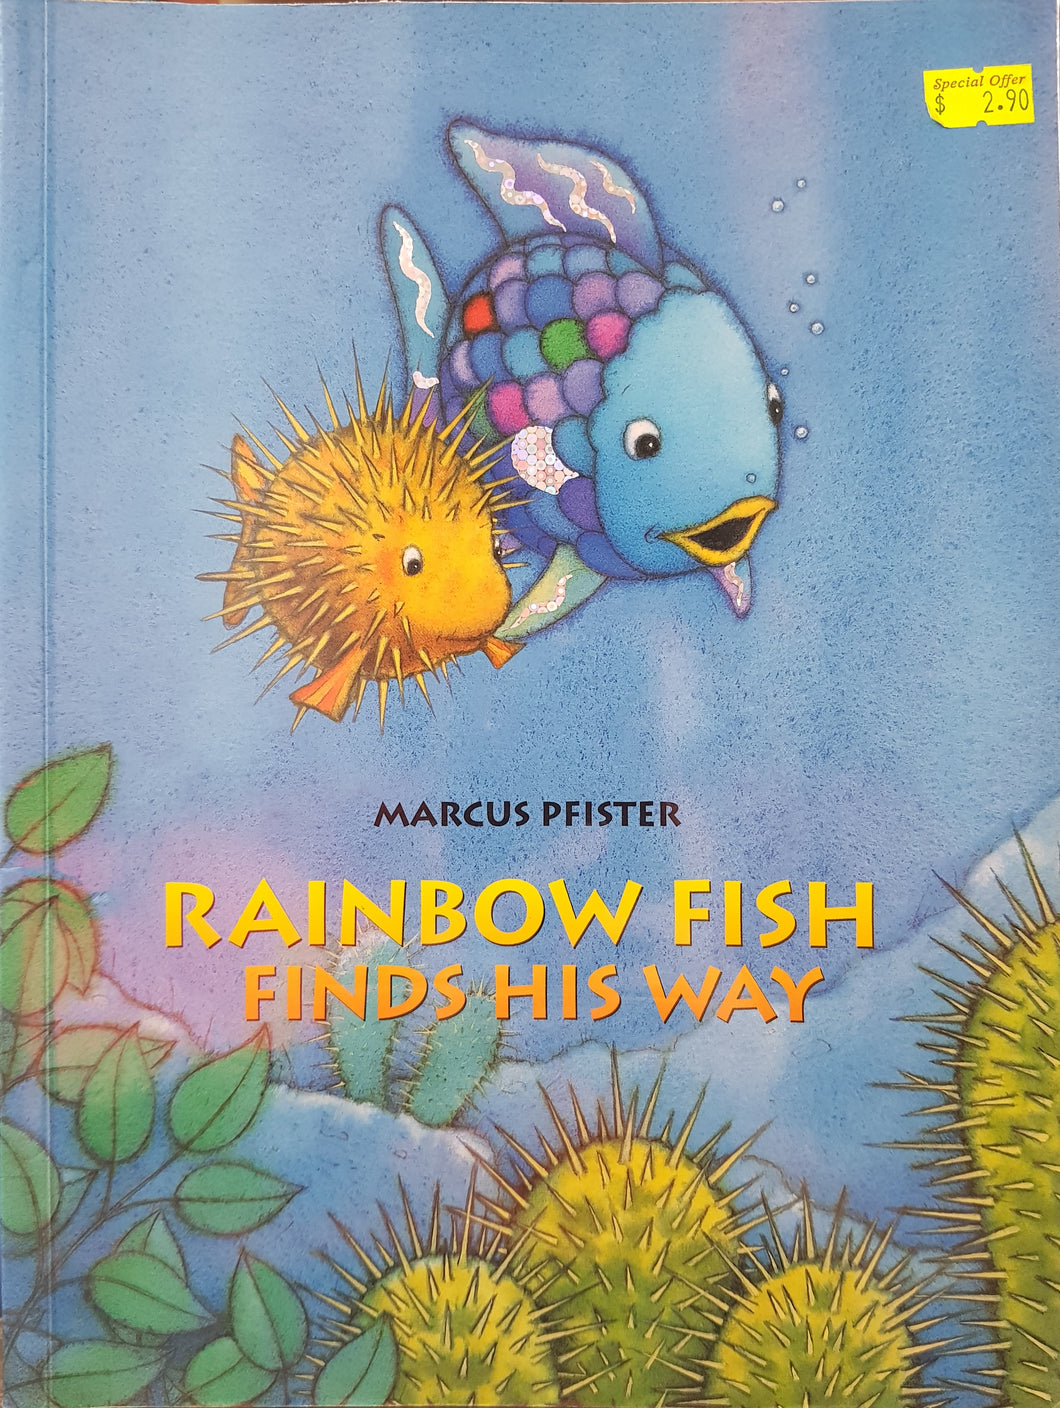 The Rainbow Fish Finds His Way - Marcus Pfister